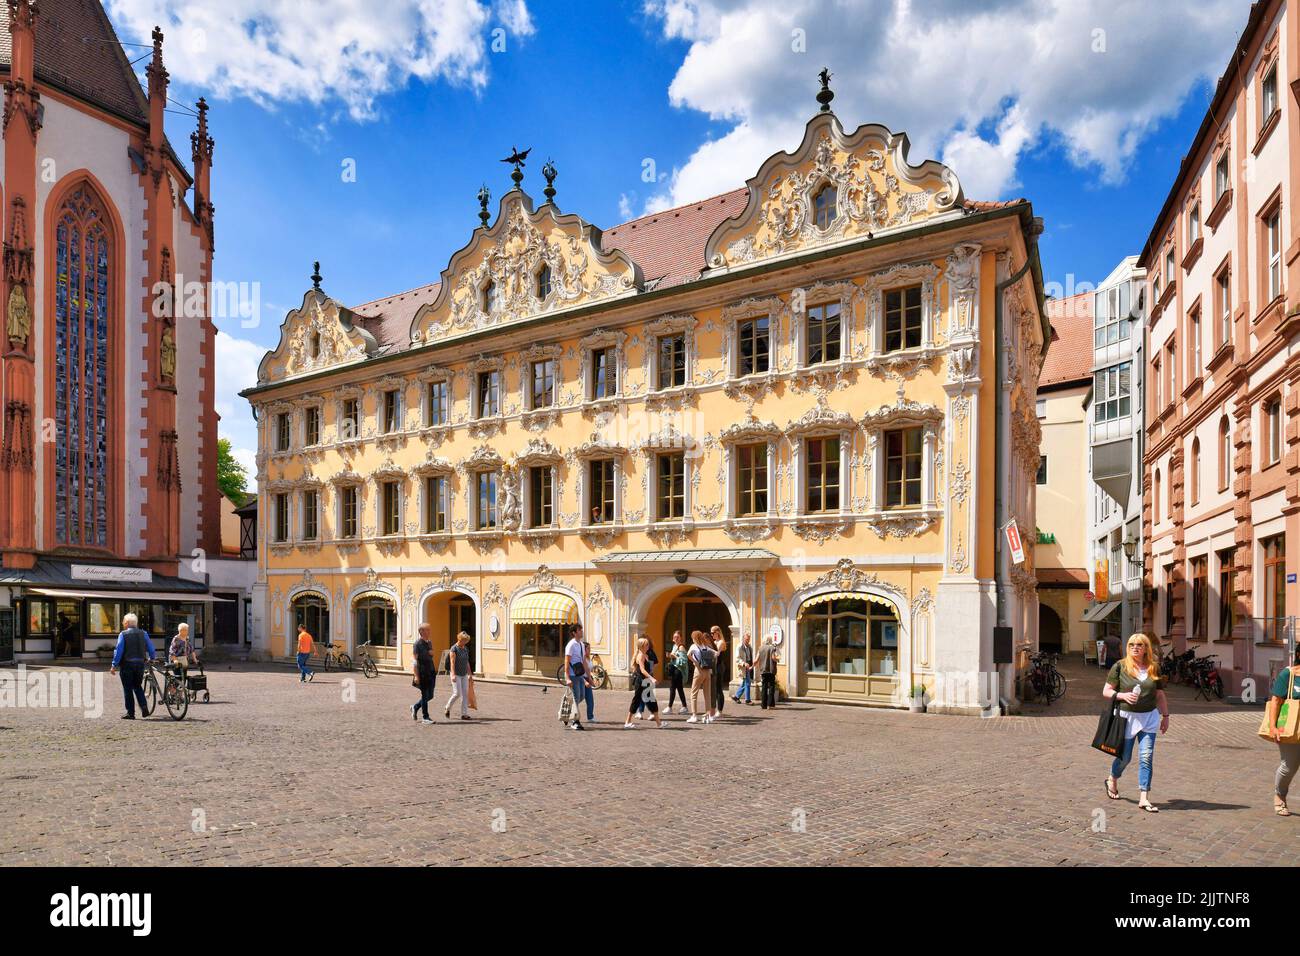 Würzburg, Germany - June 2022: Public library building called 'Haus zum Falken' with stucco decoration in Rococo architecture style Stock Photo